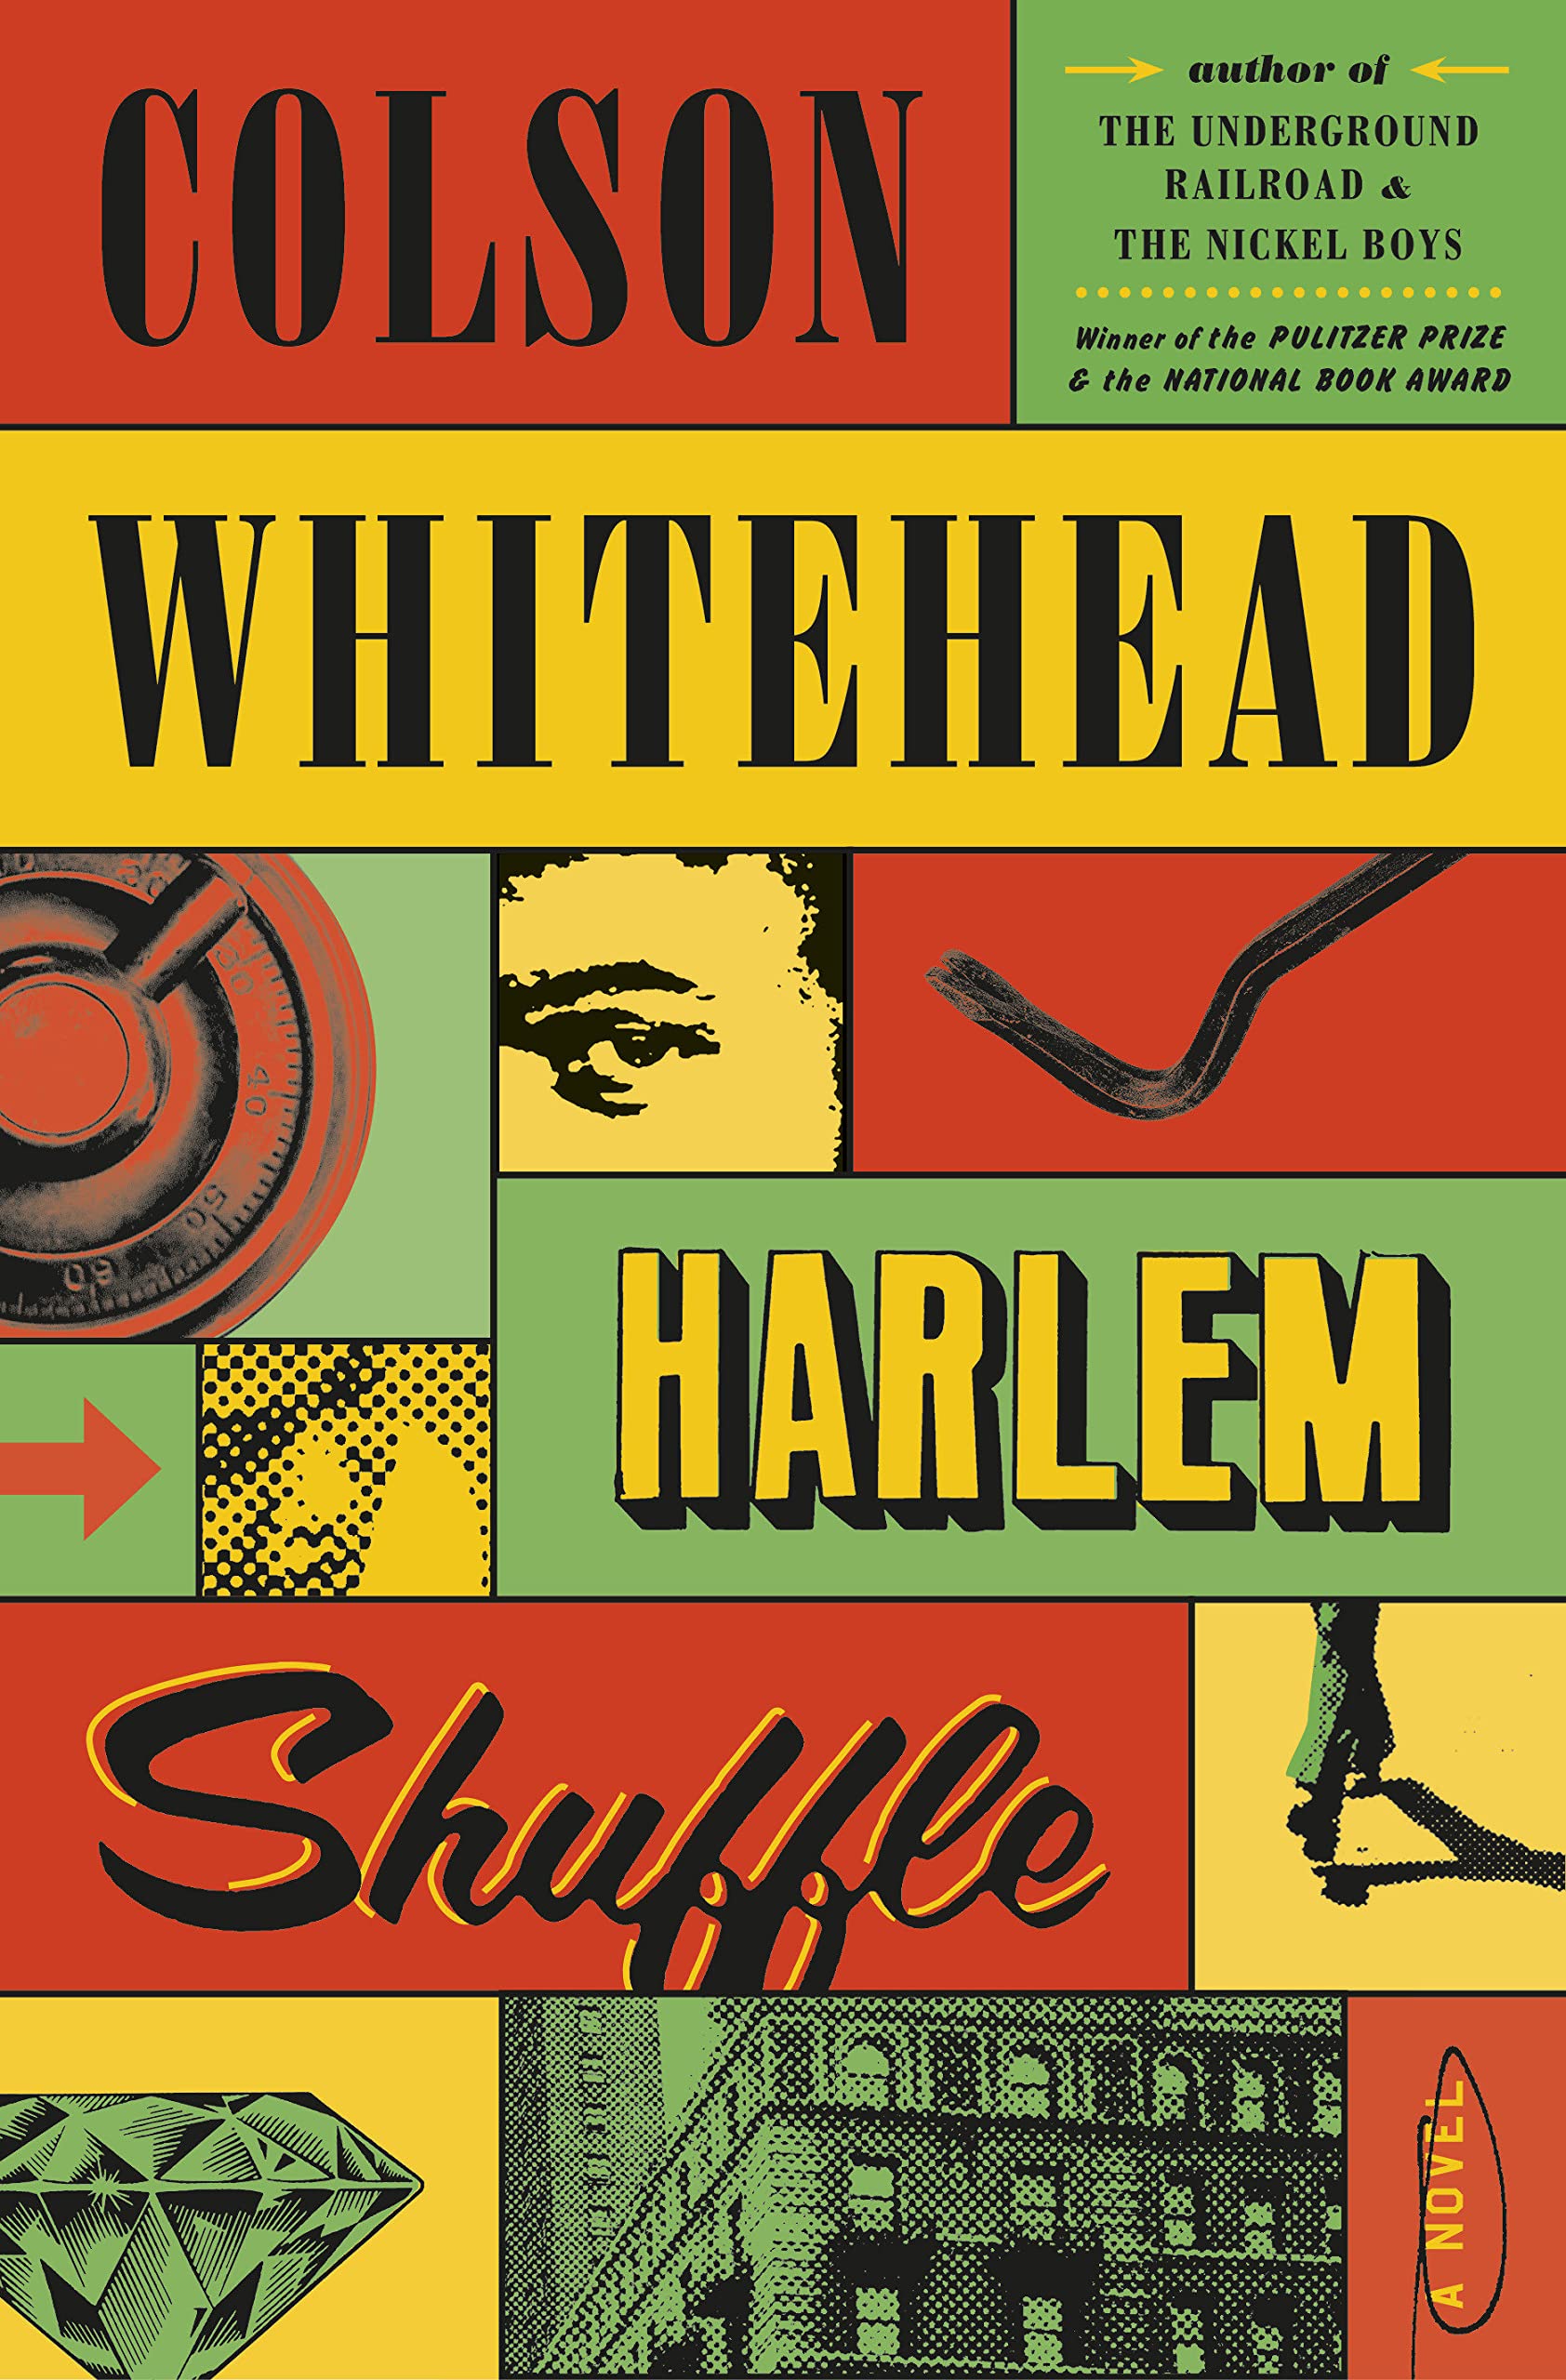 Harlem Shuffle for Hearthside project 2022